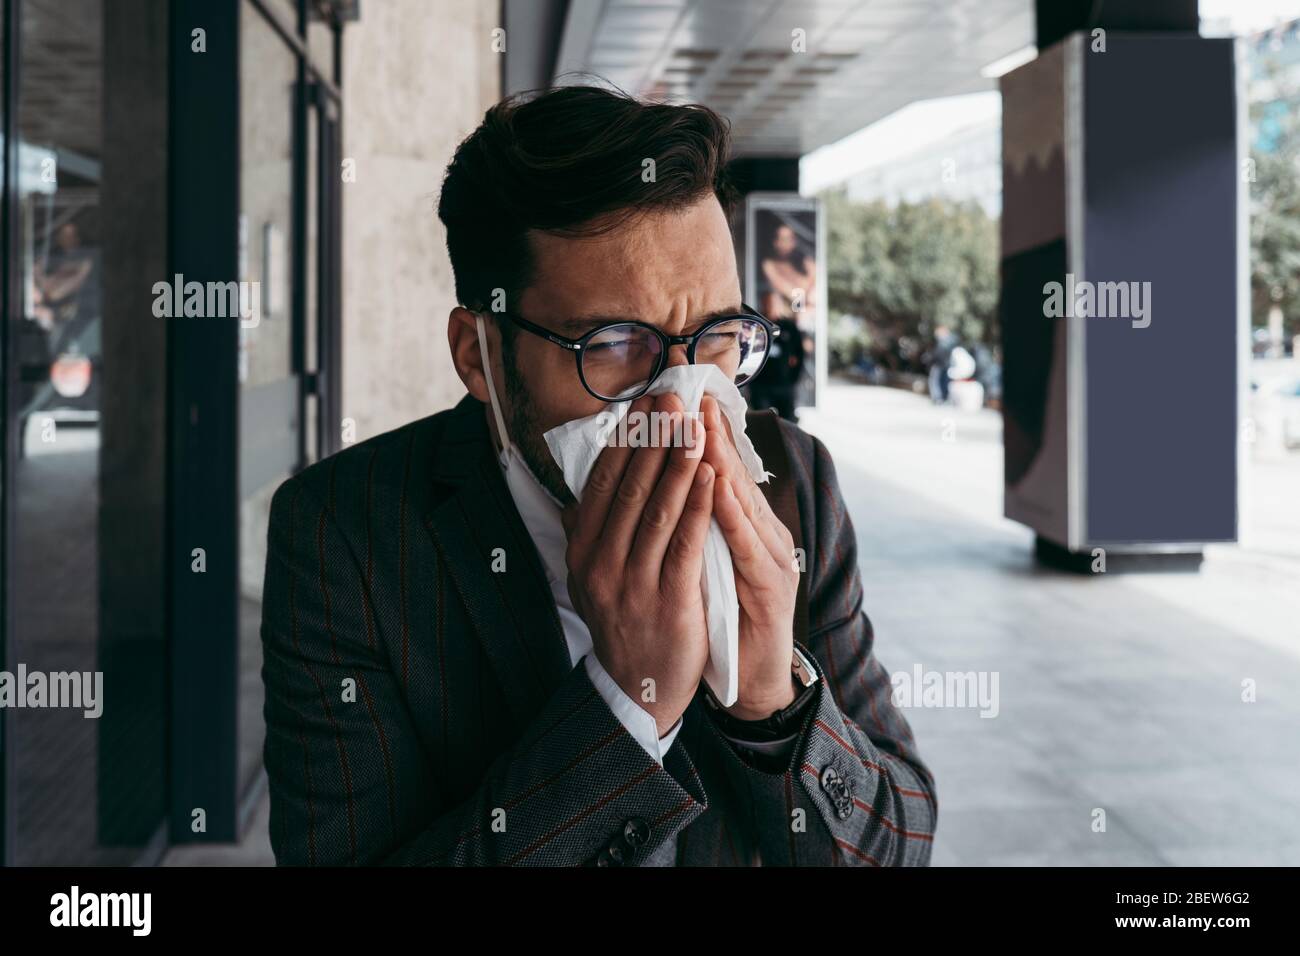 Sick man with protective face mask coughing and sneezing on street. Stock Photo